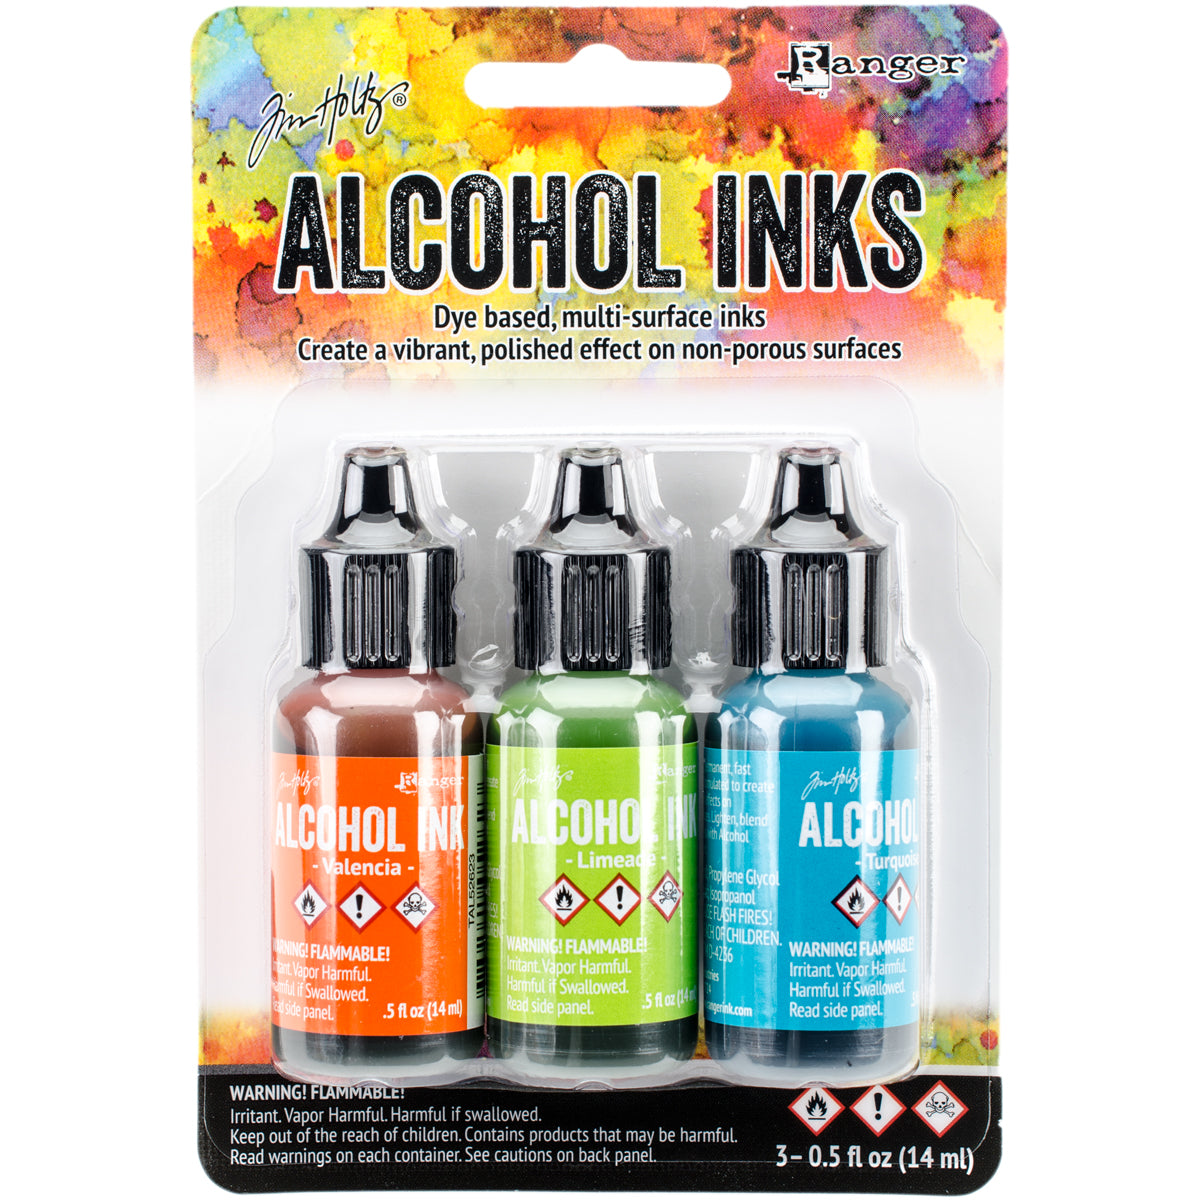 Jacquard Pinata Color Exciter Pack Alcohol Ink Bundle with Alcohol Blending  Solution, Pixiss Blending Tools and Legion Yupo Paper : : Home